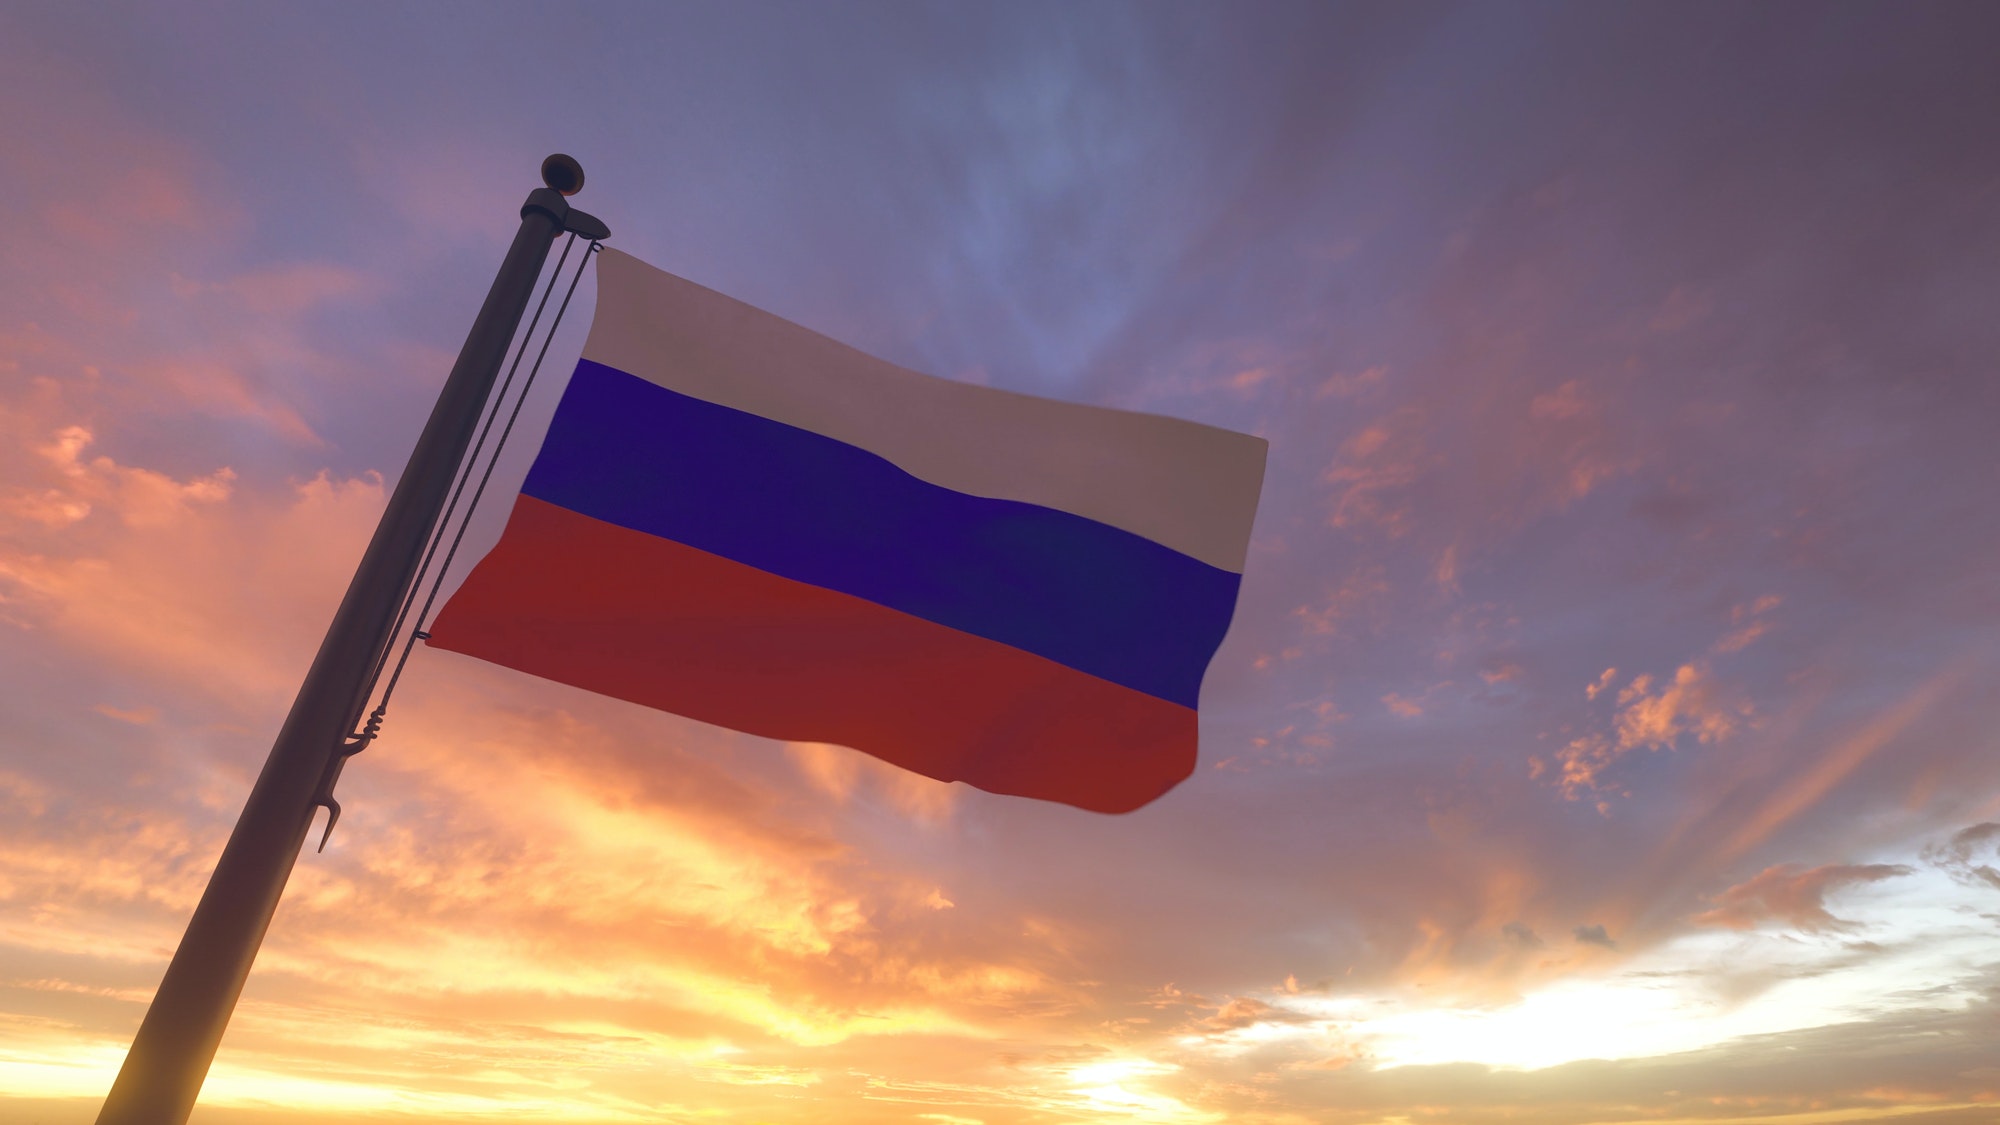 Russia Flag on a Flagpole Sunset Evening